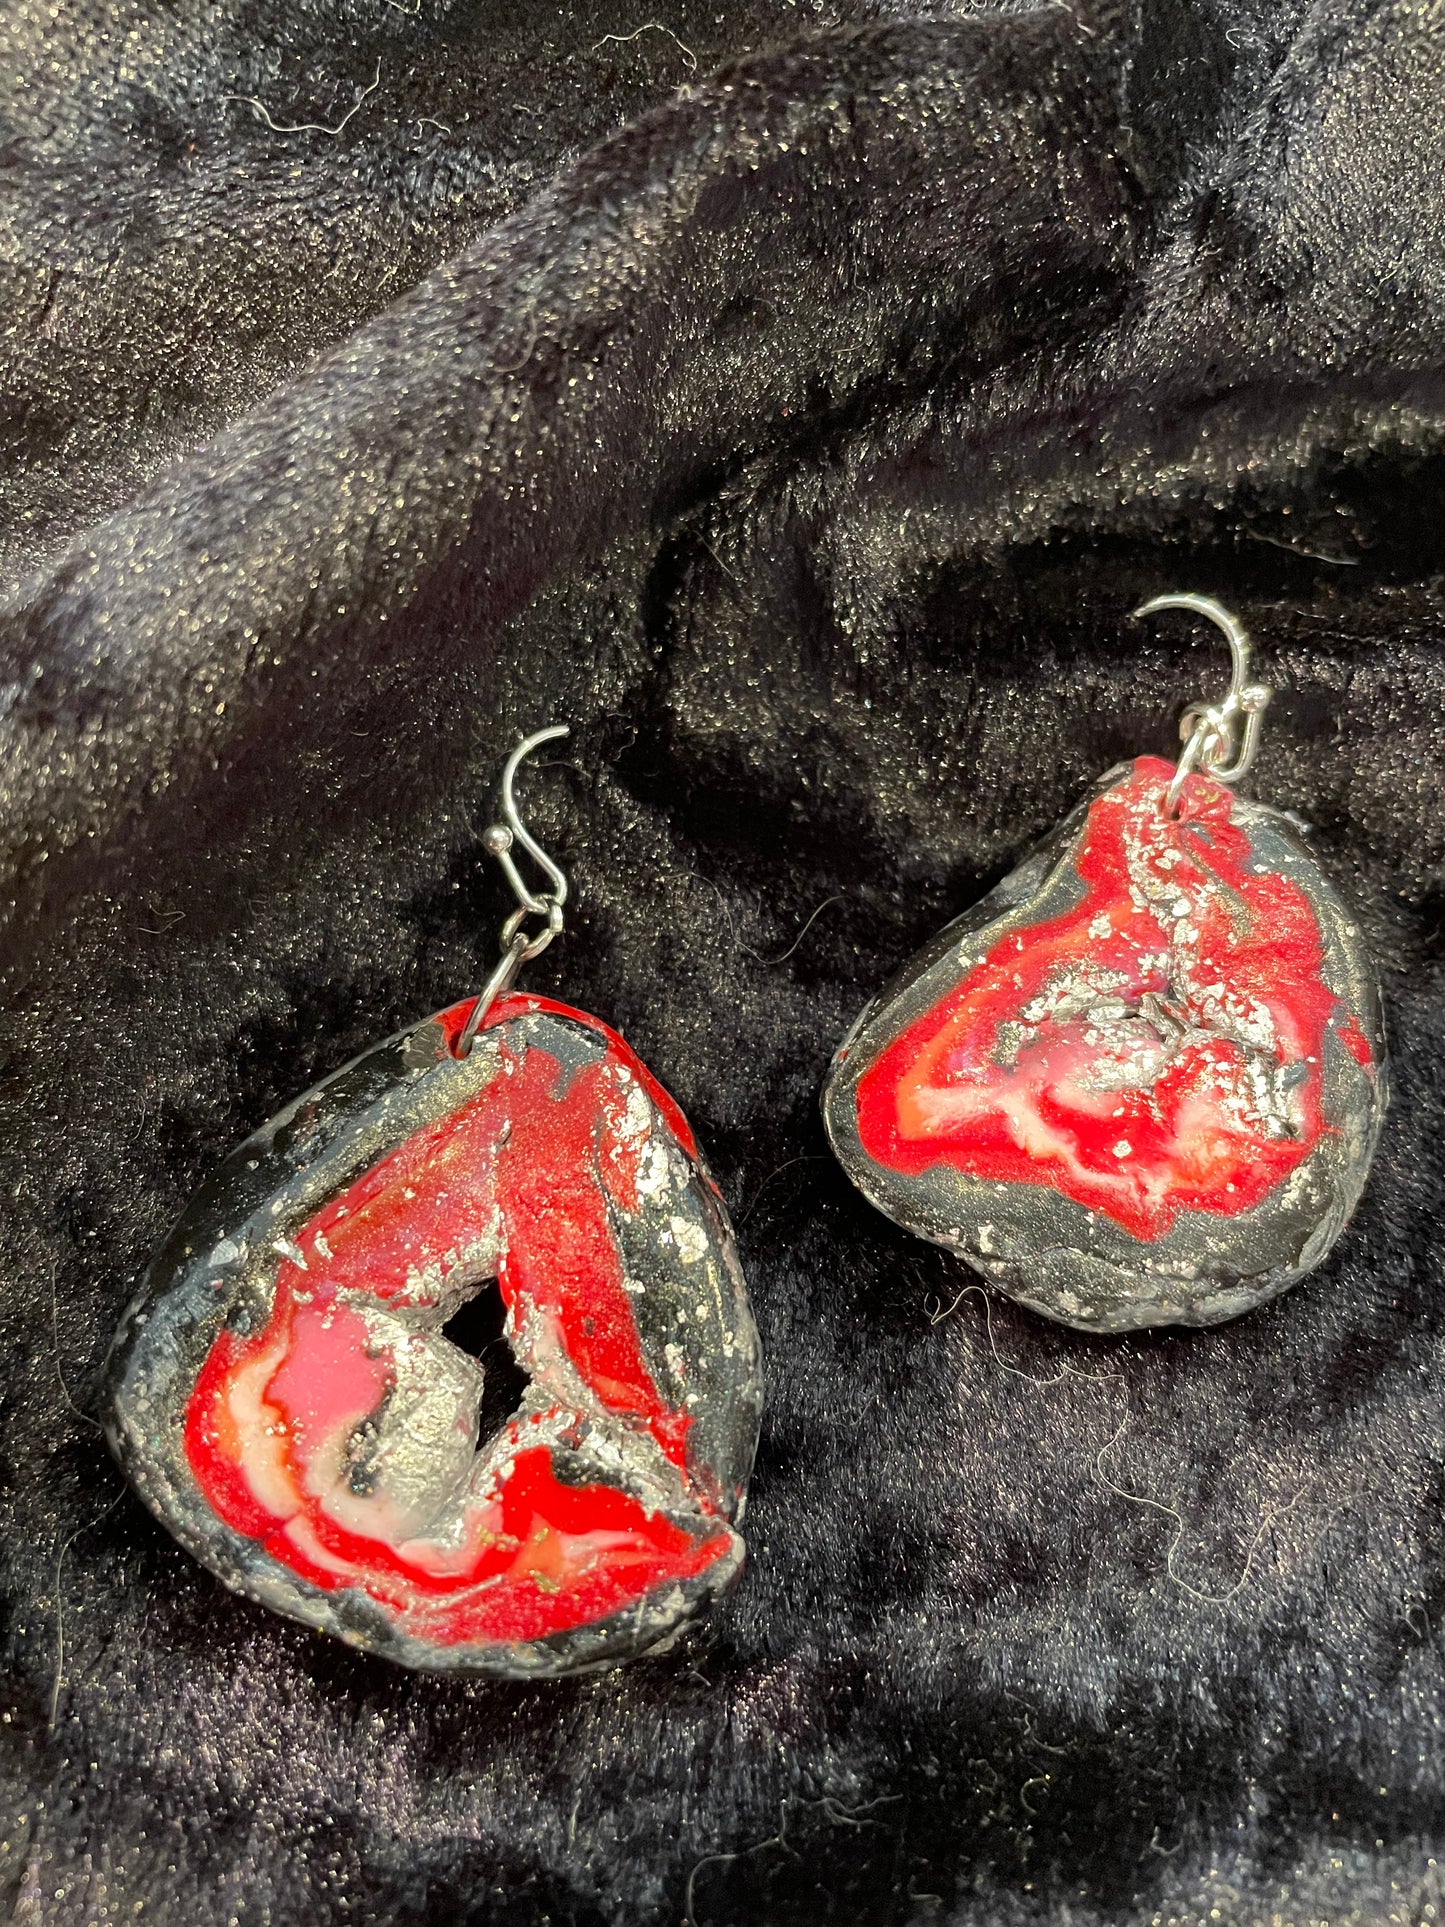 Black, white & red Polymer clay earrings